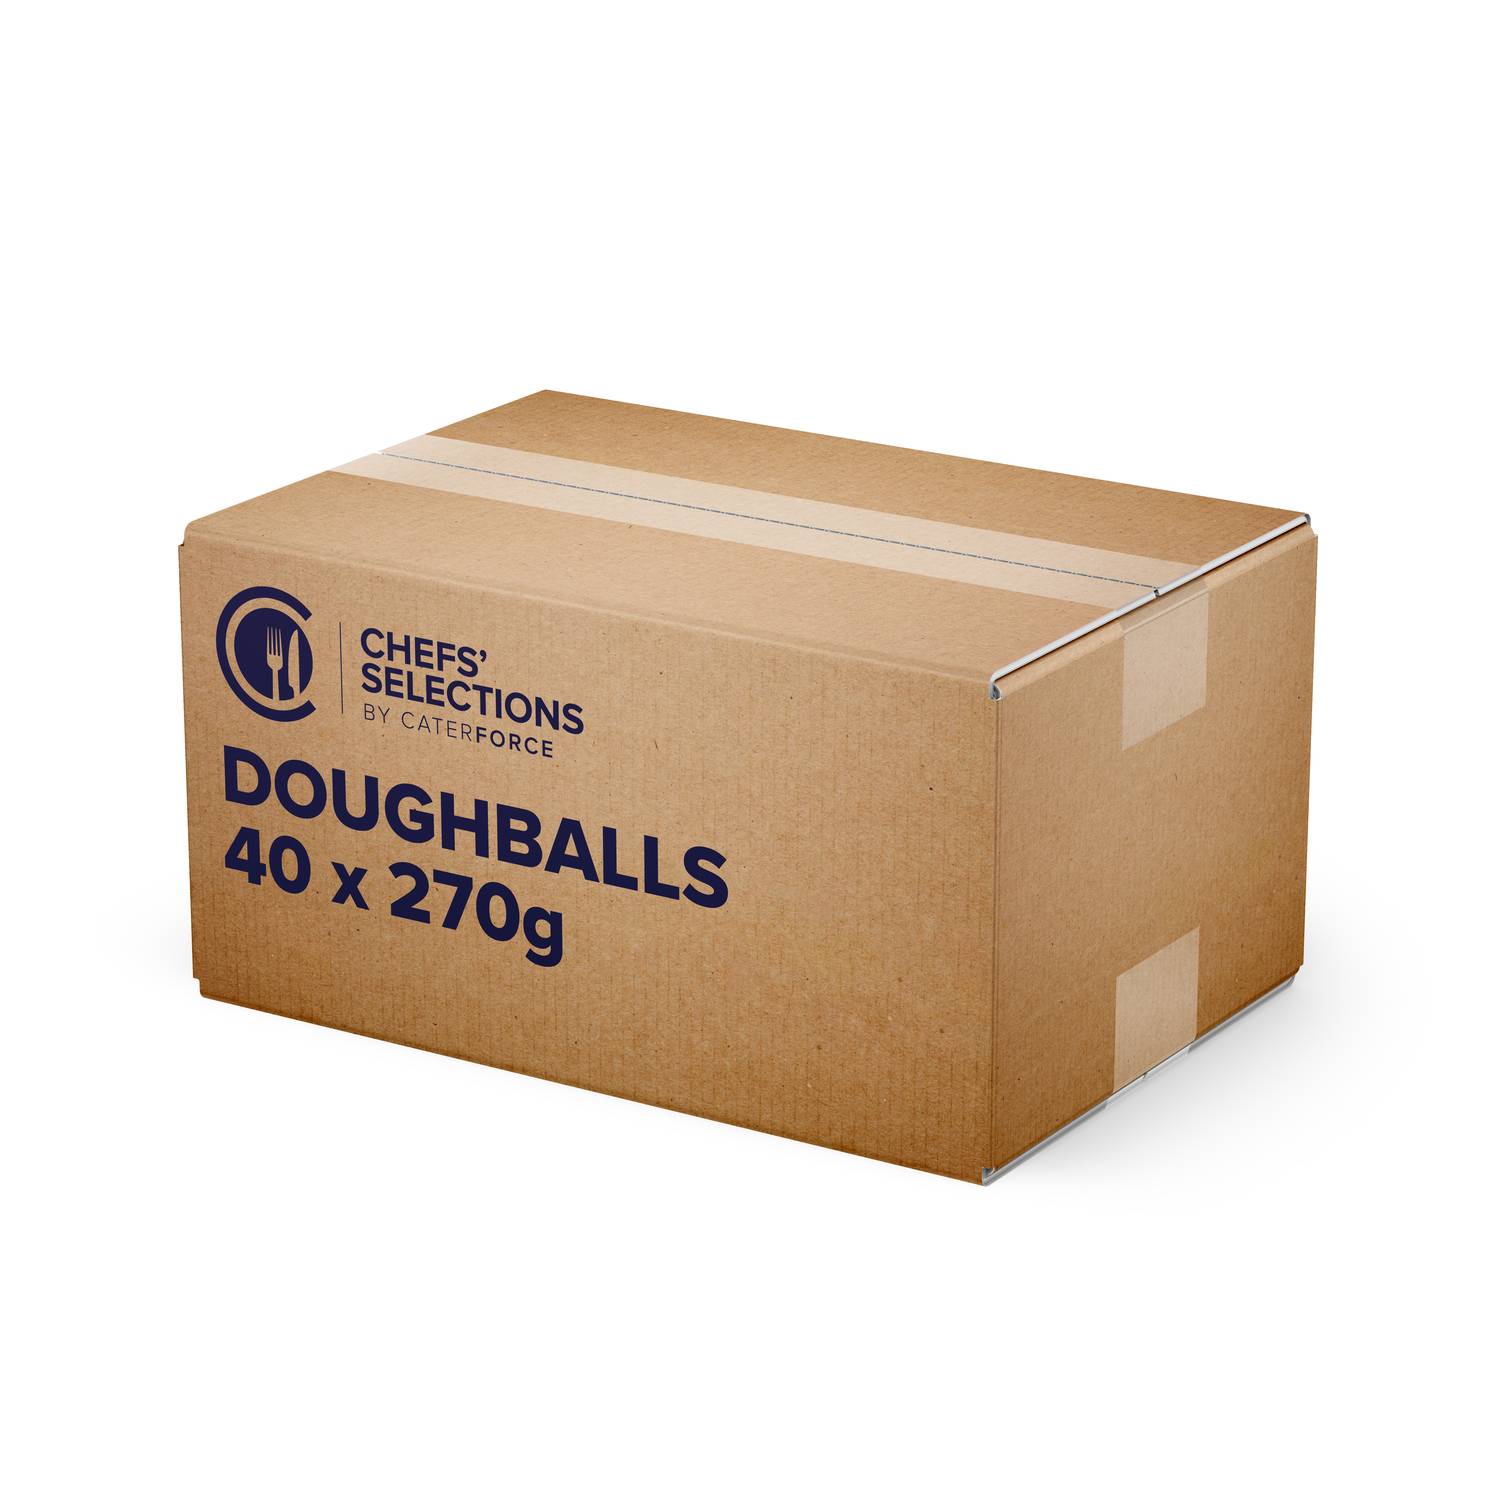 Chefs’ Selections Doughballs 270g (40 x 270g)